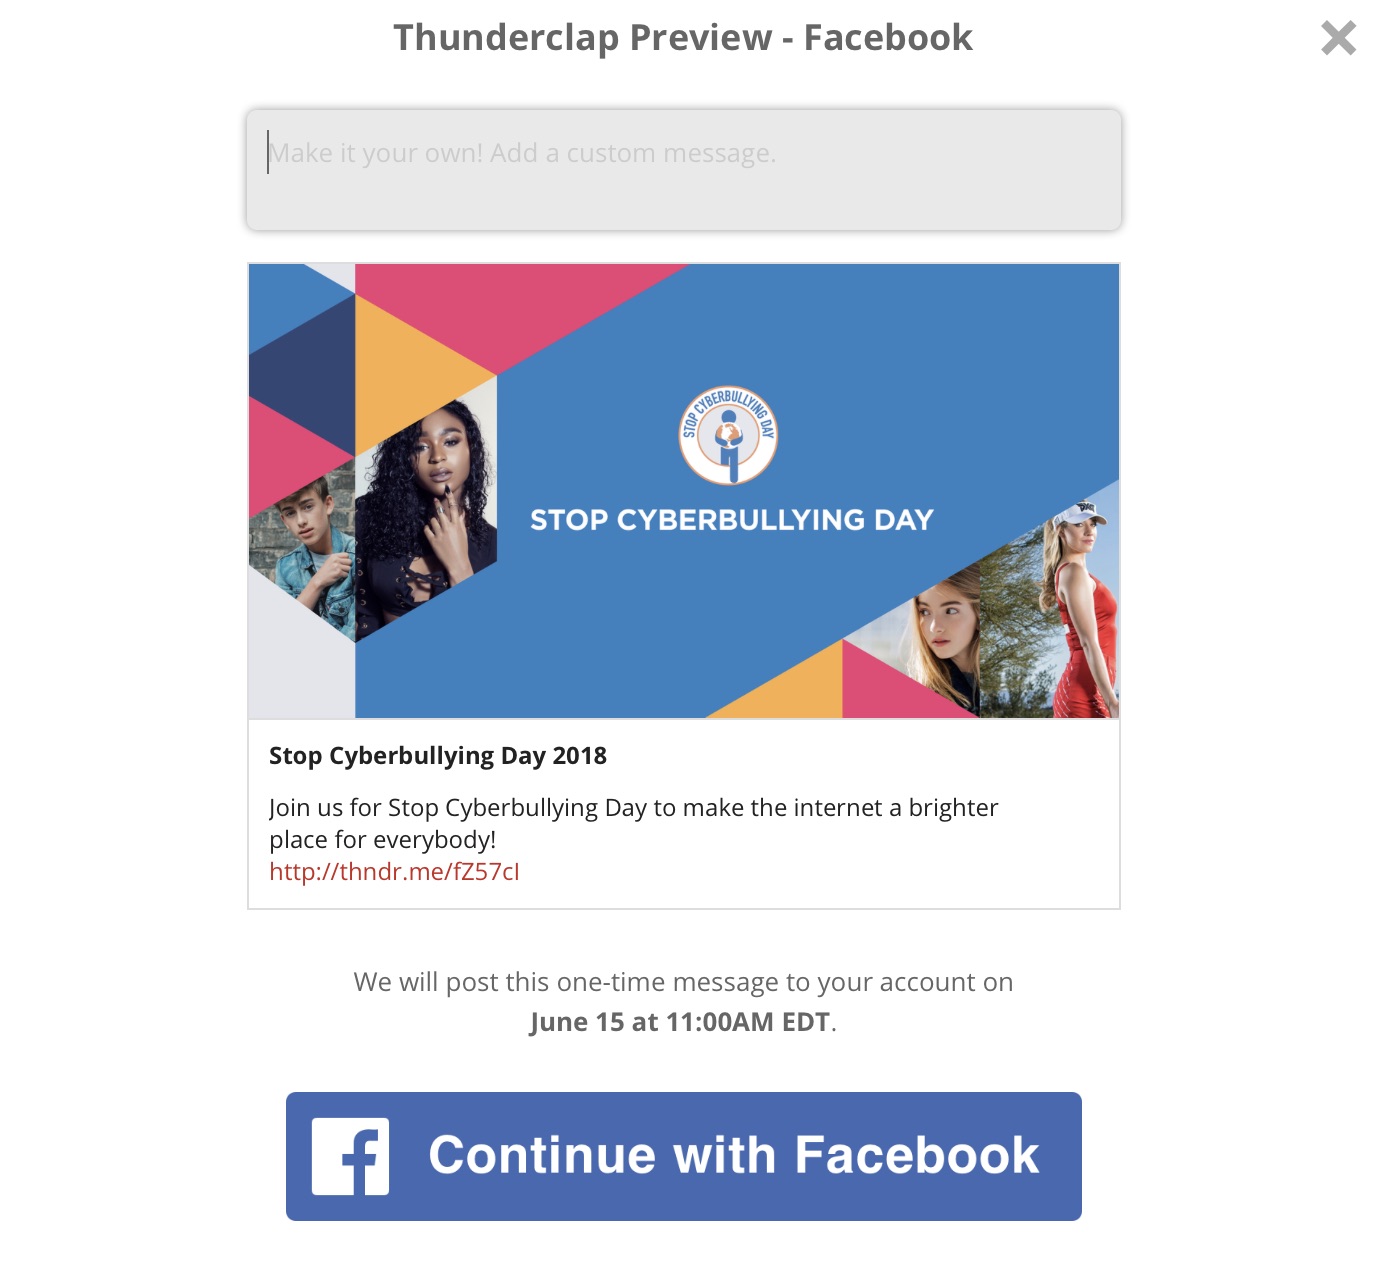 Thunderclap-Stop-Cyberbullying-Day-2018-Facebook-Signup